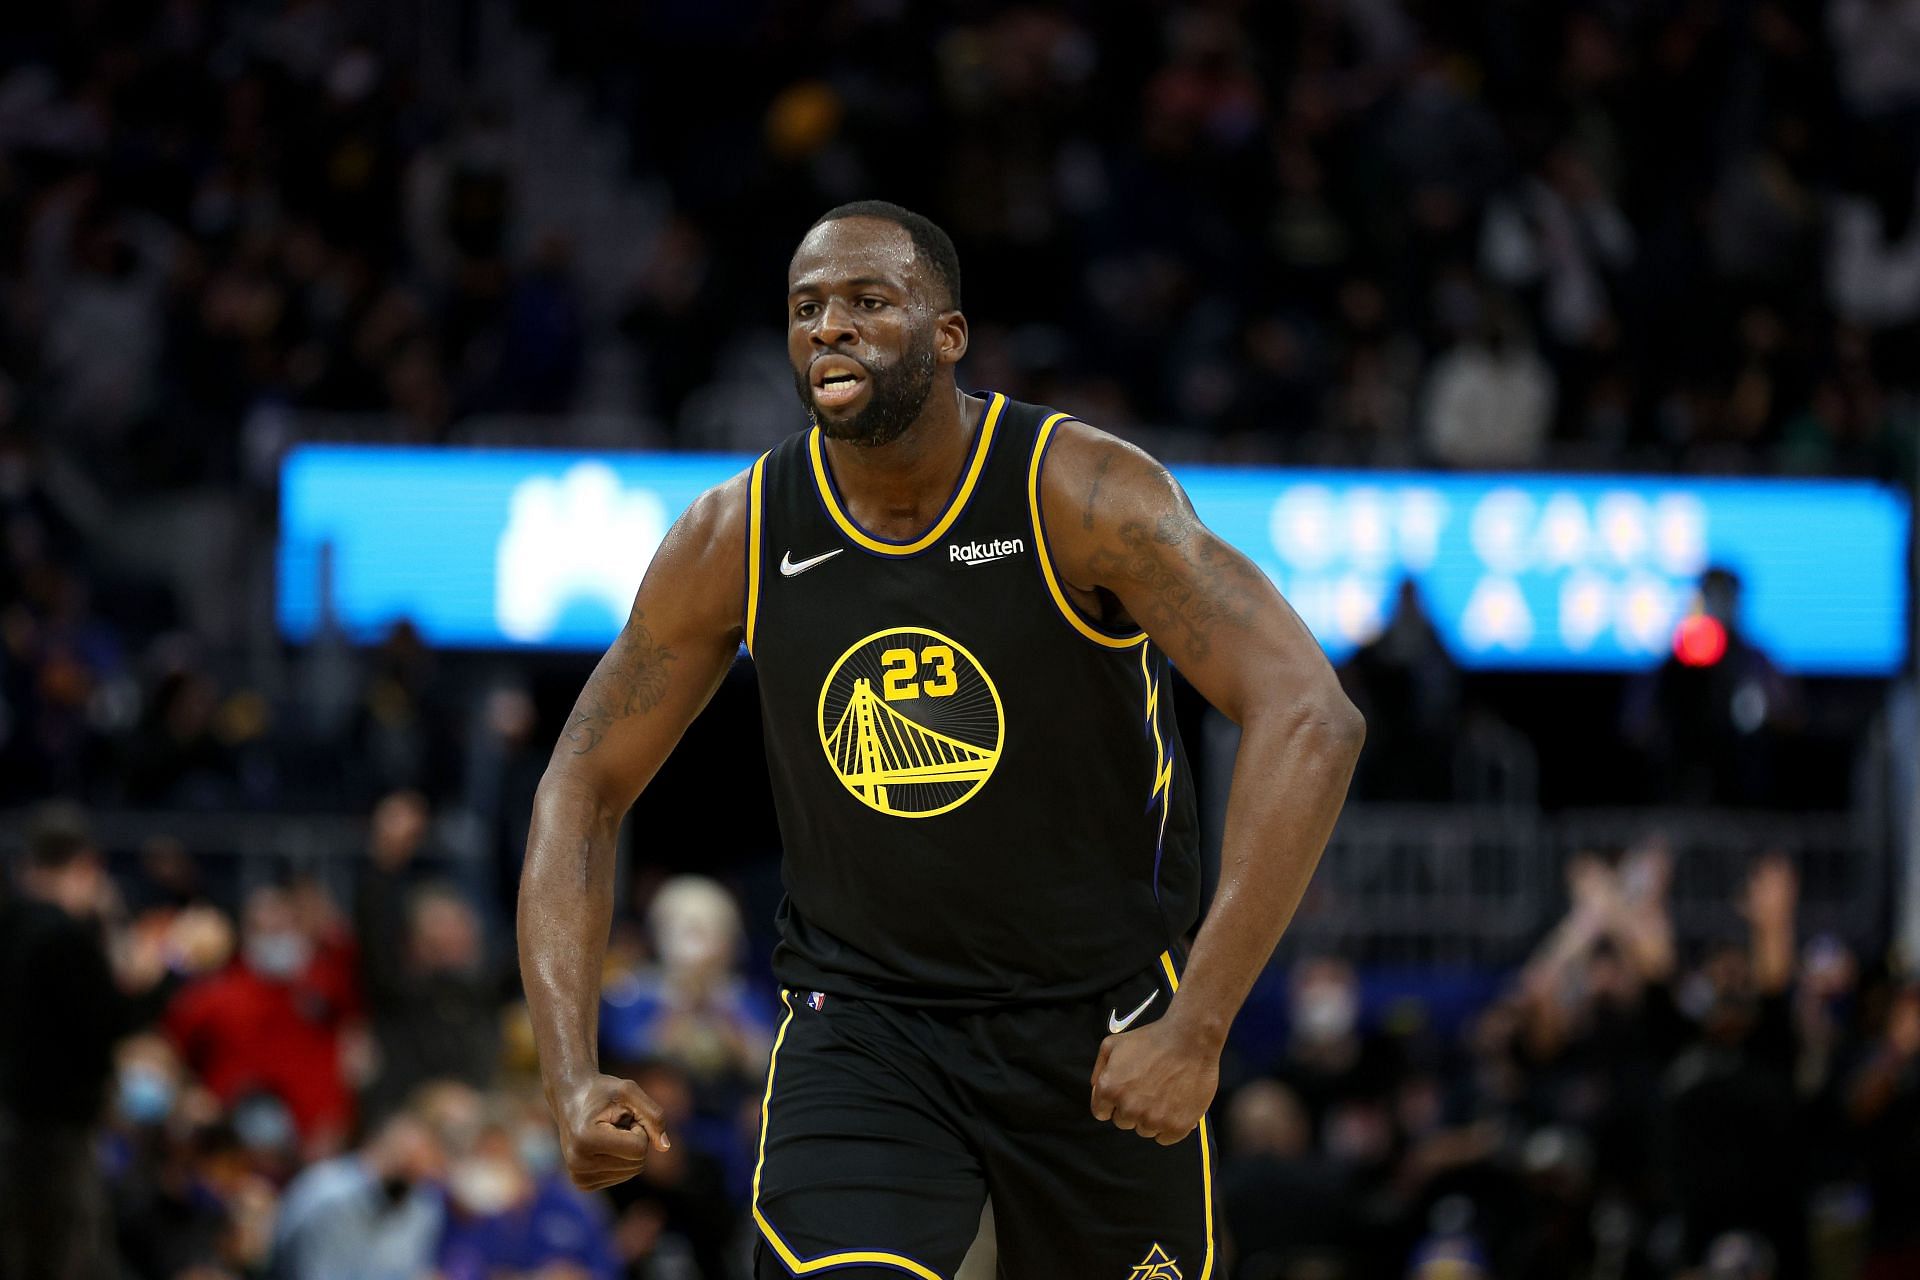 Draymond Green reacts after Jordan Poole of the Golden State Warriors dunked on Omer Yurtseven of the Miami Heat in the second half on Jan. 3, 2022 in San Francisco, California.